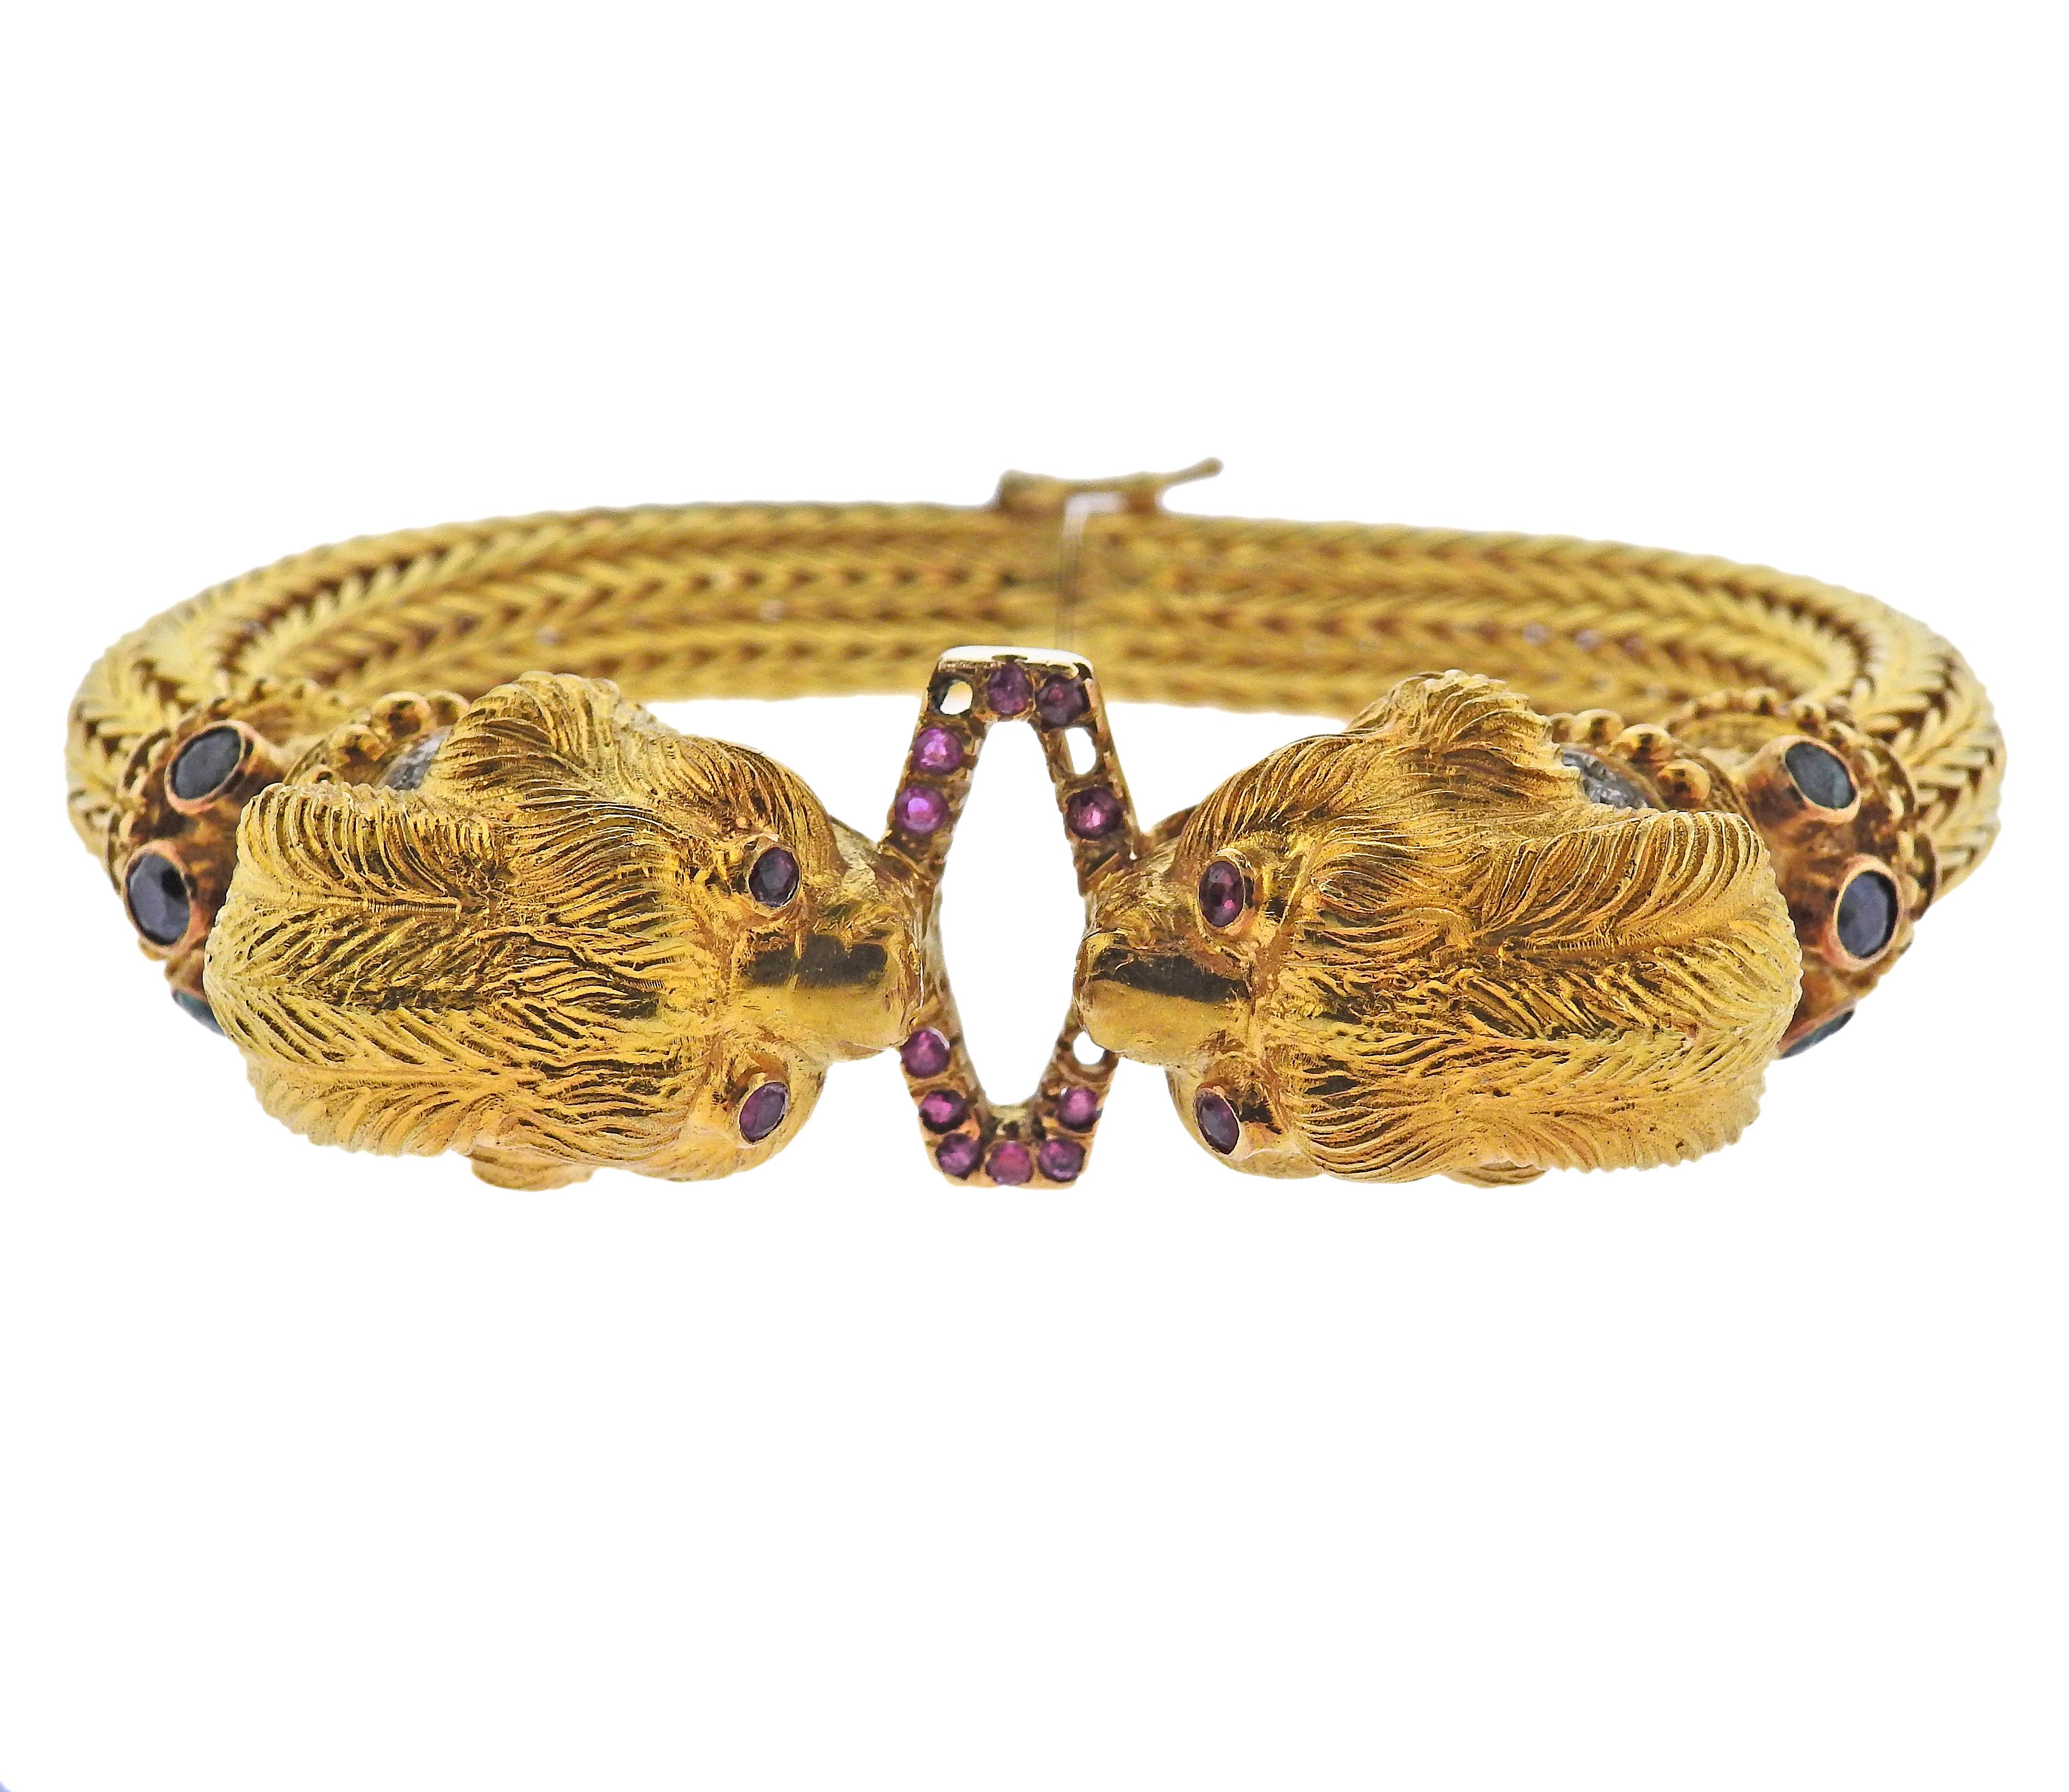 18k yellow gold bracelet by Greek designer Ilias Lalaounis, featuring two large Chimera heads, adorned with rubies, sapphires and diamonds (few stones are missing). Bracelet is approx. 7